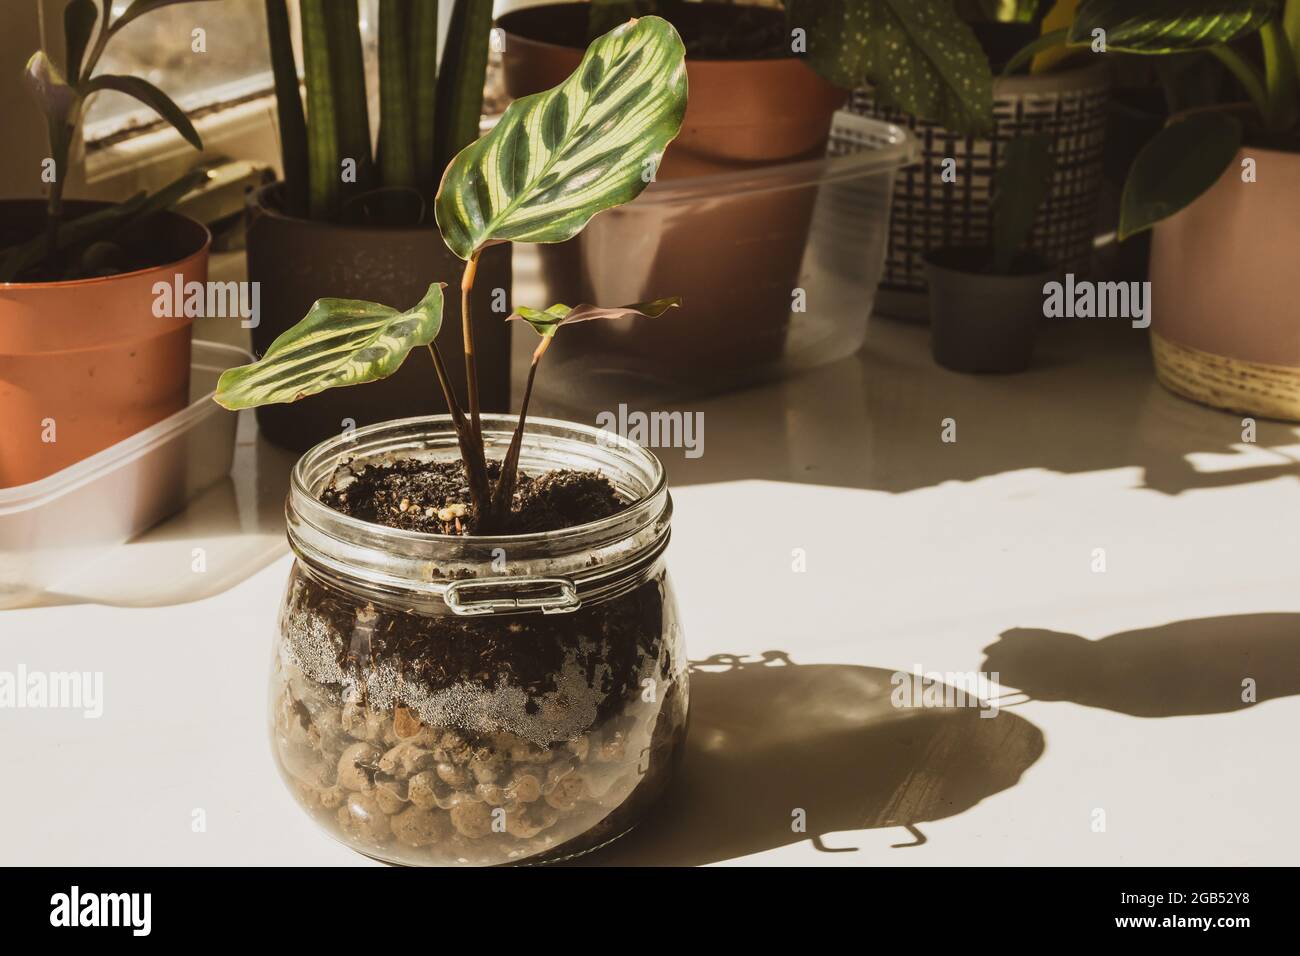 A calathea makoyana or Peacock plant in a glass jar improvised as a plant pot which is basking in sunshine on the windowsill of a home. Stock Photo